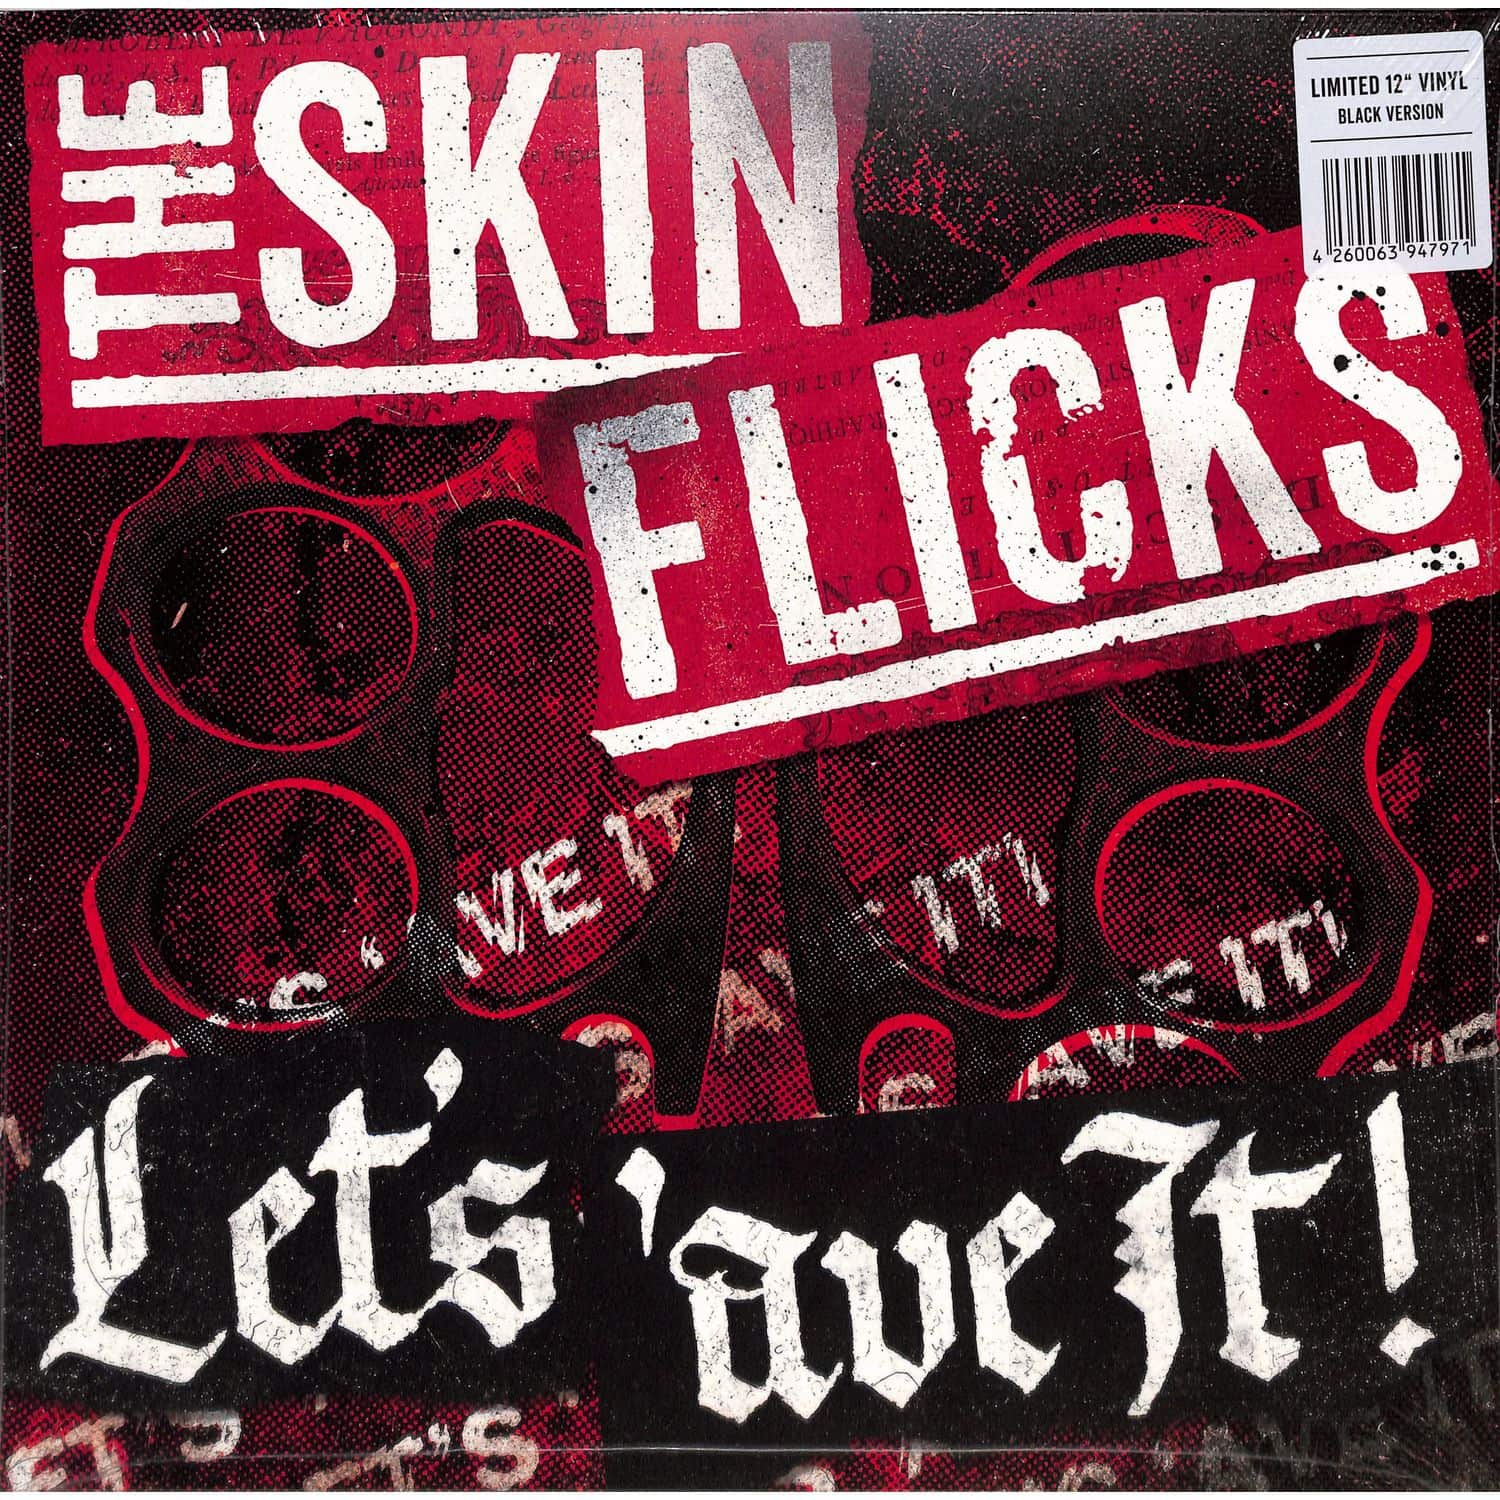 The Skinflicks - LET S AVE IT! 